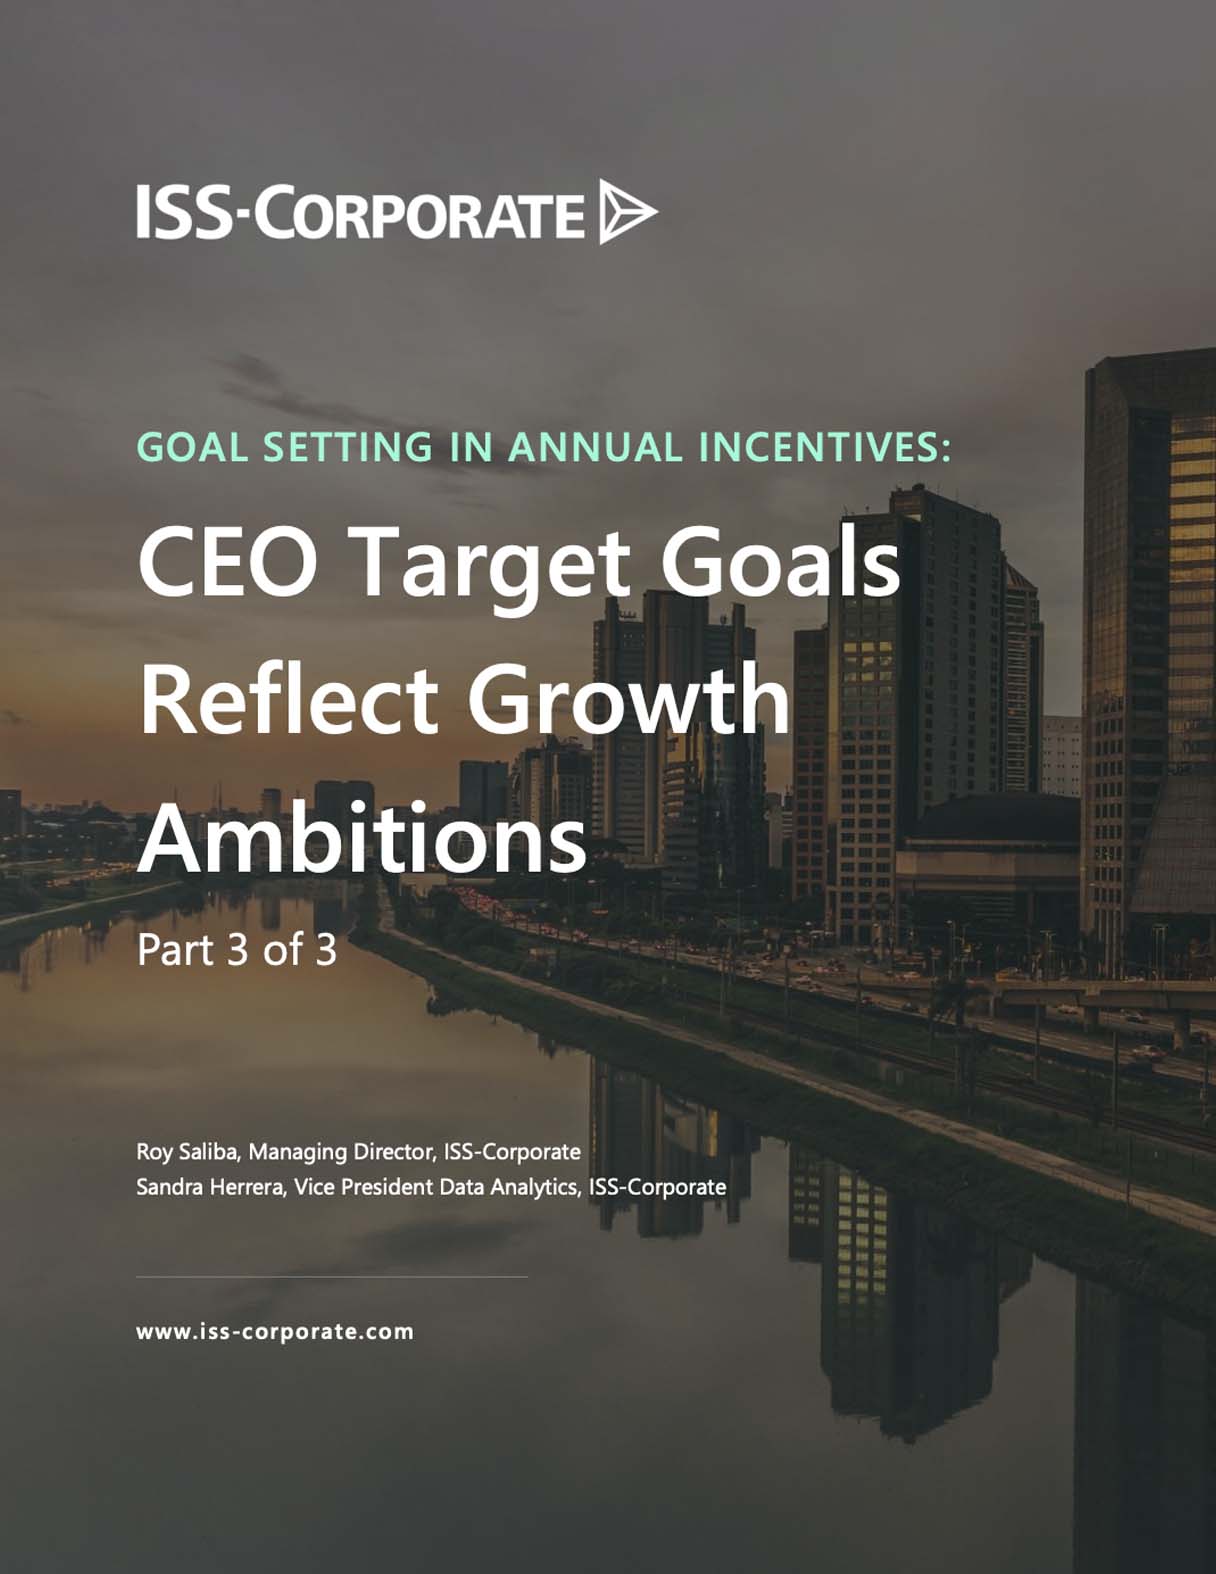 Goal Setting in Annual Incentives: CEO Target Goals Reflect Growth Ambitions